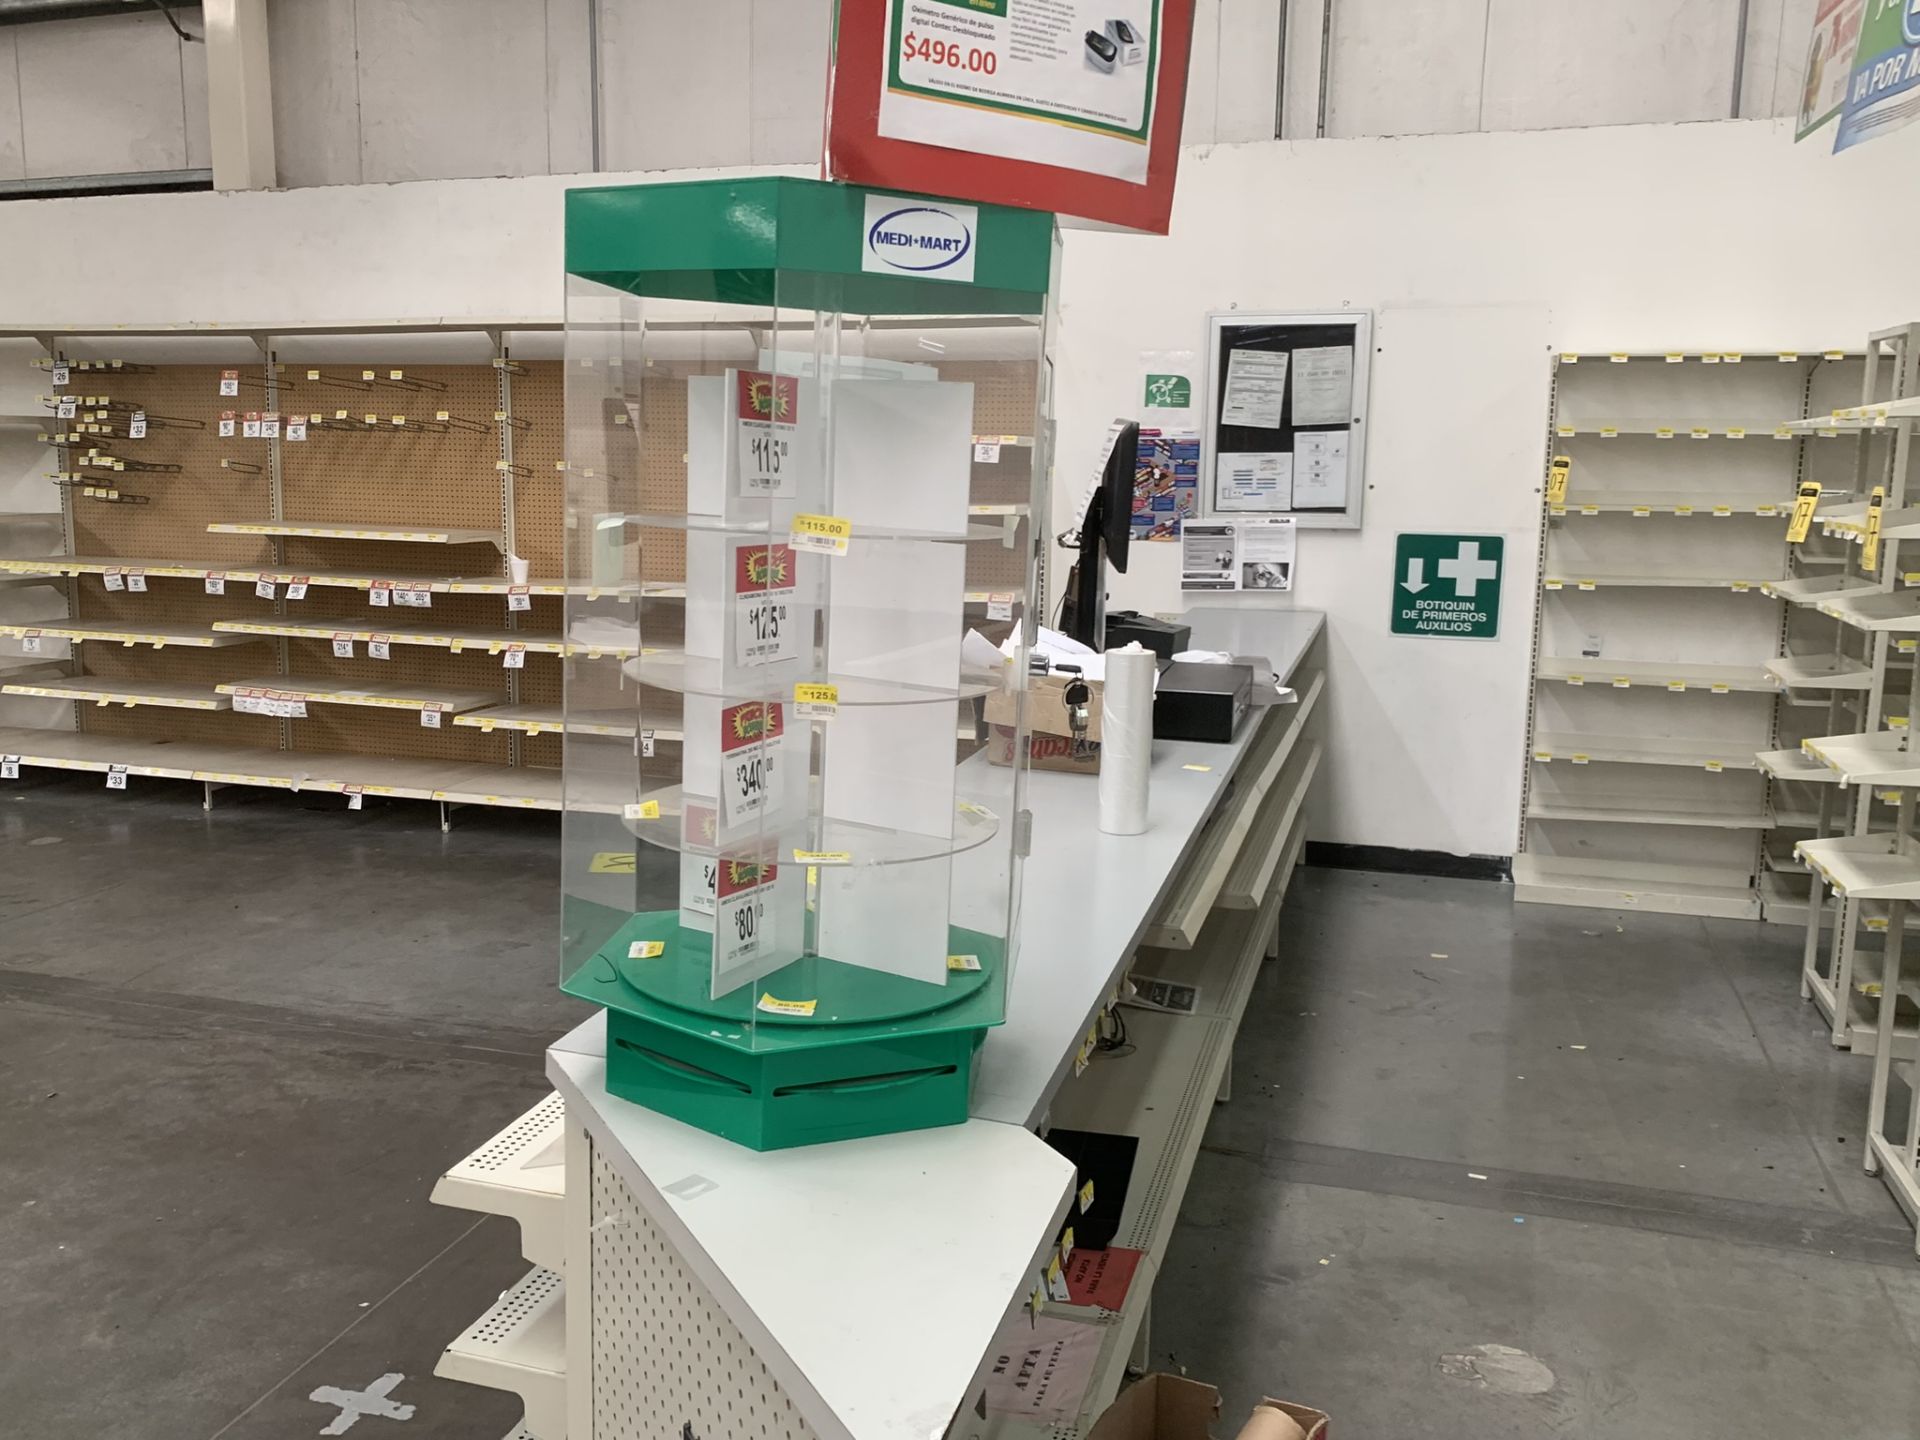 L-shaped counter for a pharmacy with a display of 31 shelves - Image 10 of 17